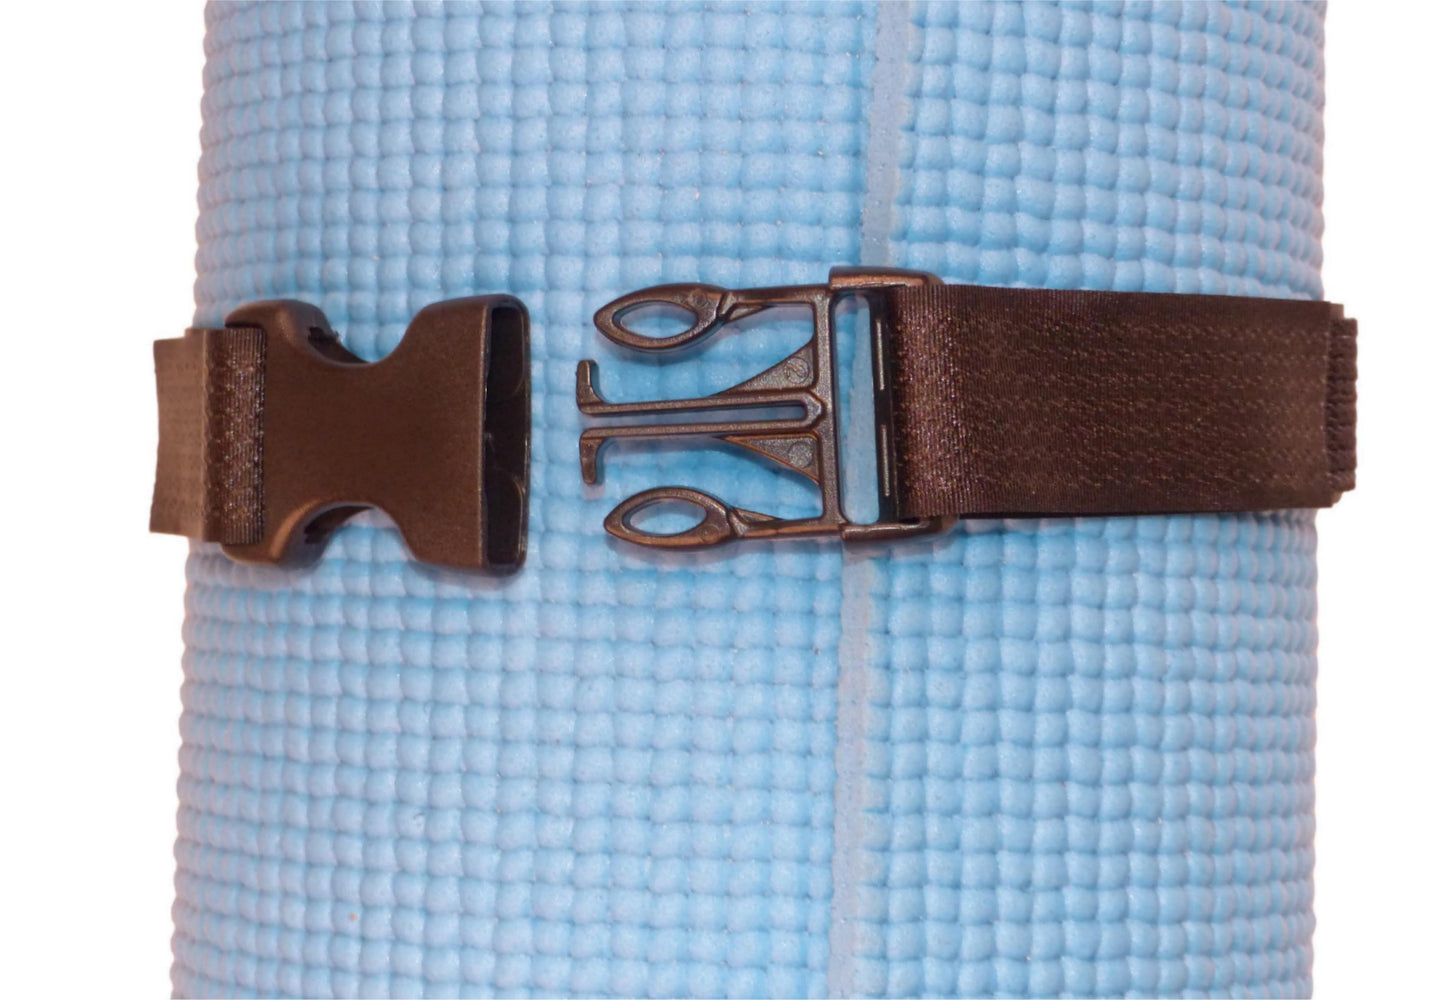 Benristraps 25mm Hook and Loop Together Strap Set with Tape, Buckles and Clips